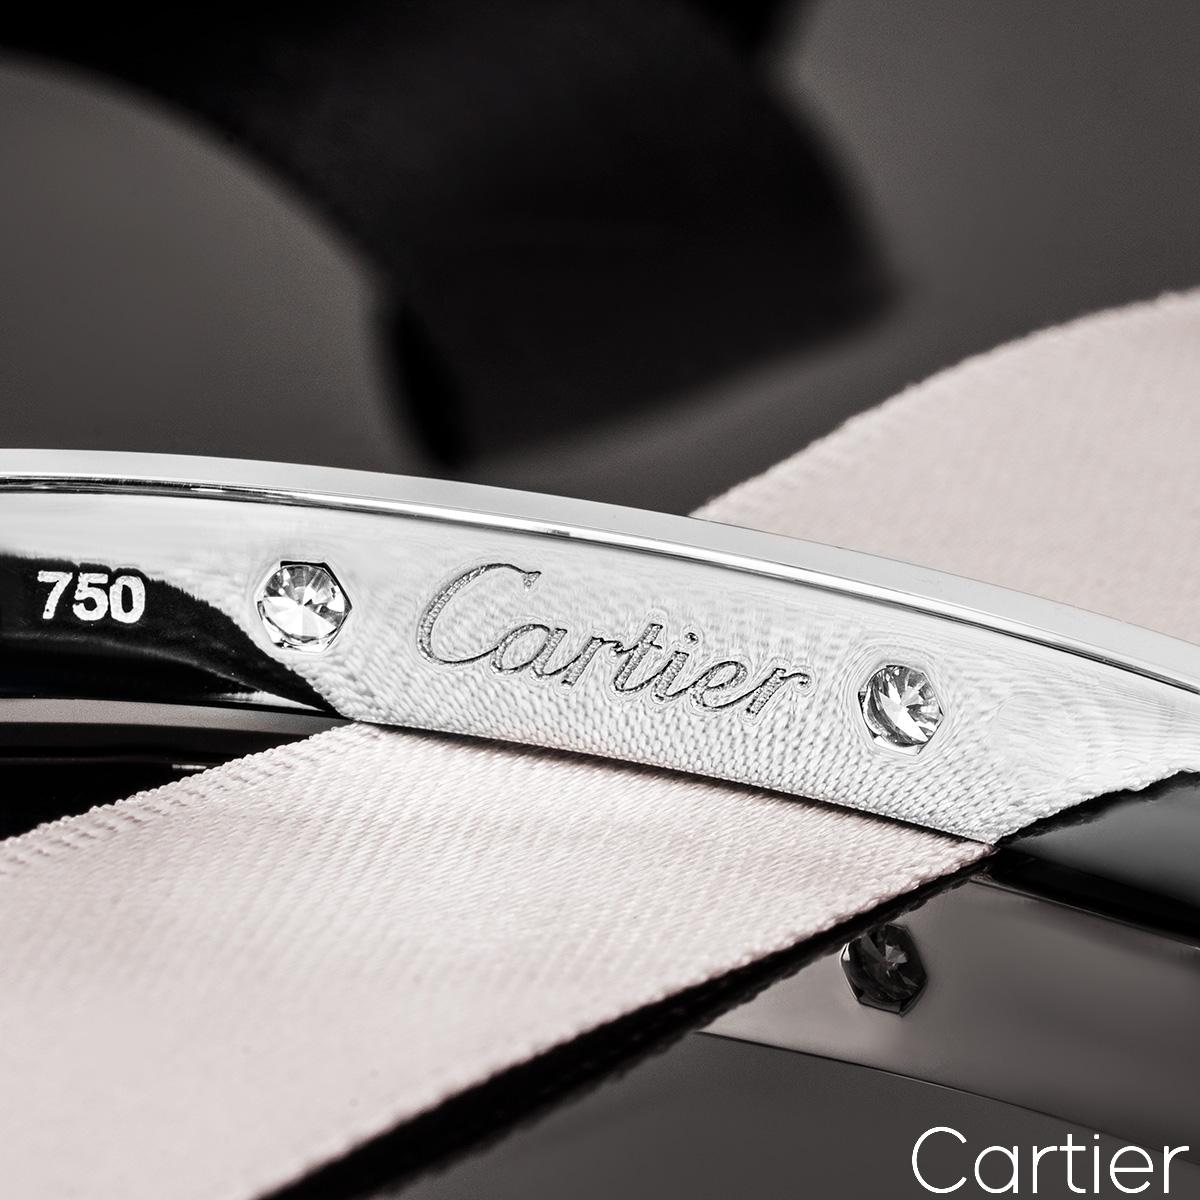 Cartier White Gold Full Diamond Love Bracelet Size 20 B6040720 In Excellent Condition For Sale In London, GB